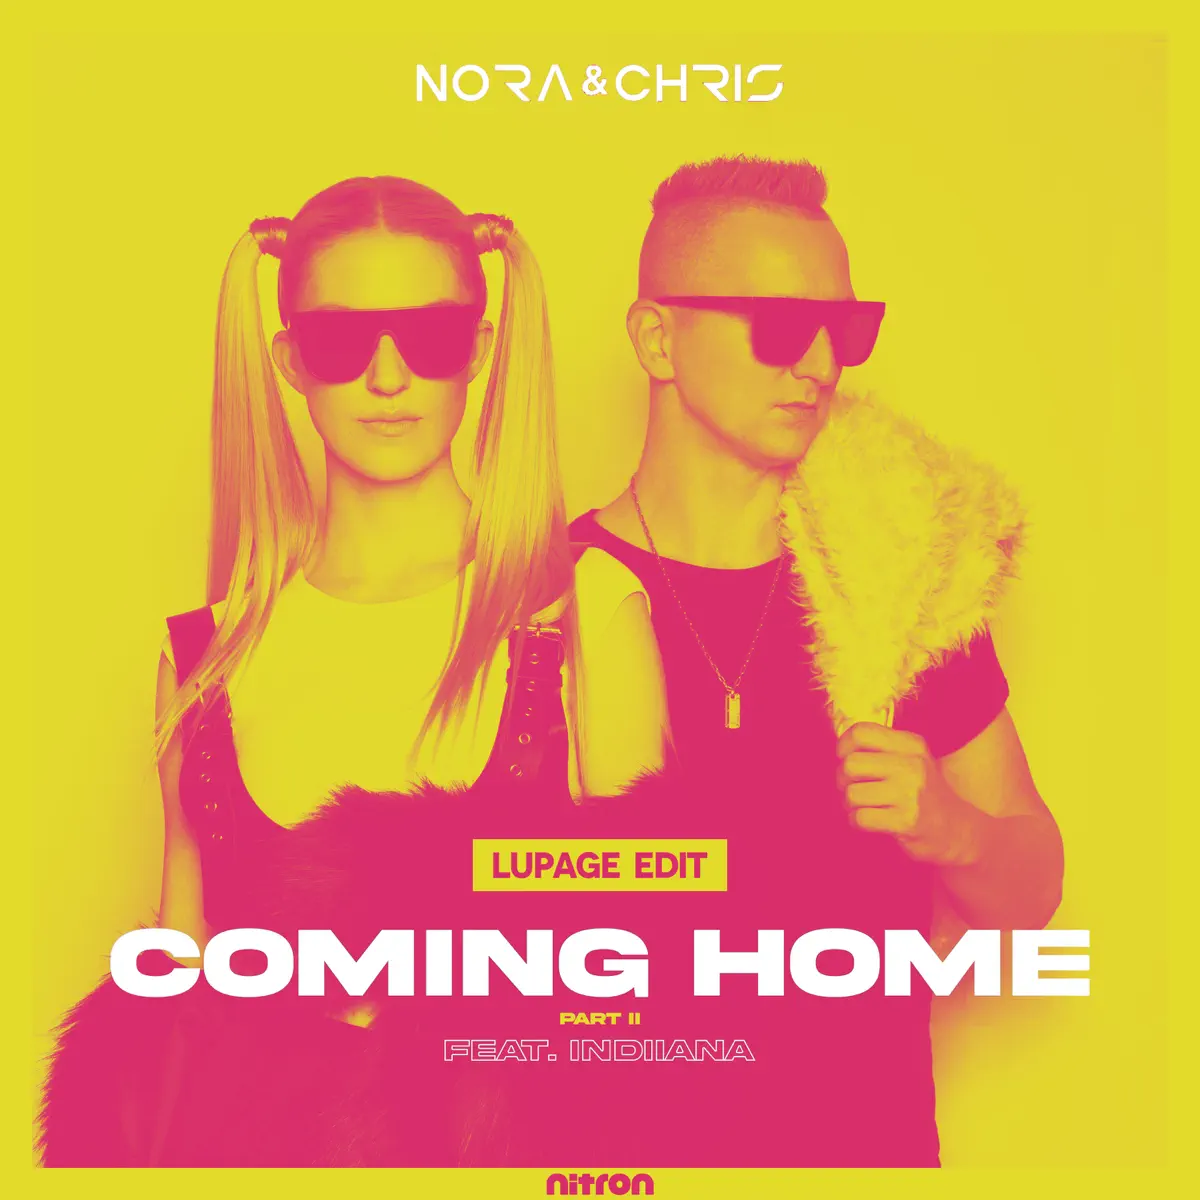 Nora & Chris - Coming Home (feat. Indiiana) [Lupage Edit] - Single / Coming Home (feat. Indiiana) [Lupage Extended Mix] - Single / Coming Home (Part II) [feat. Indiiana] - Single (2024) [iTunes Plus AAC M4A]-新房子